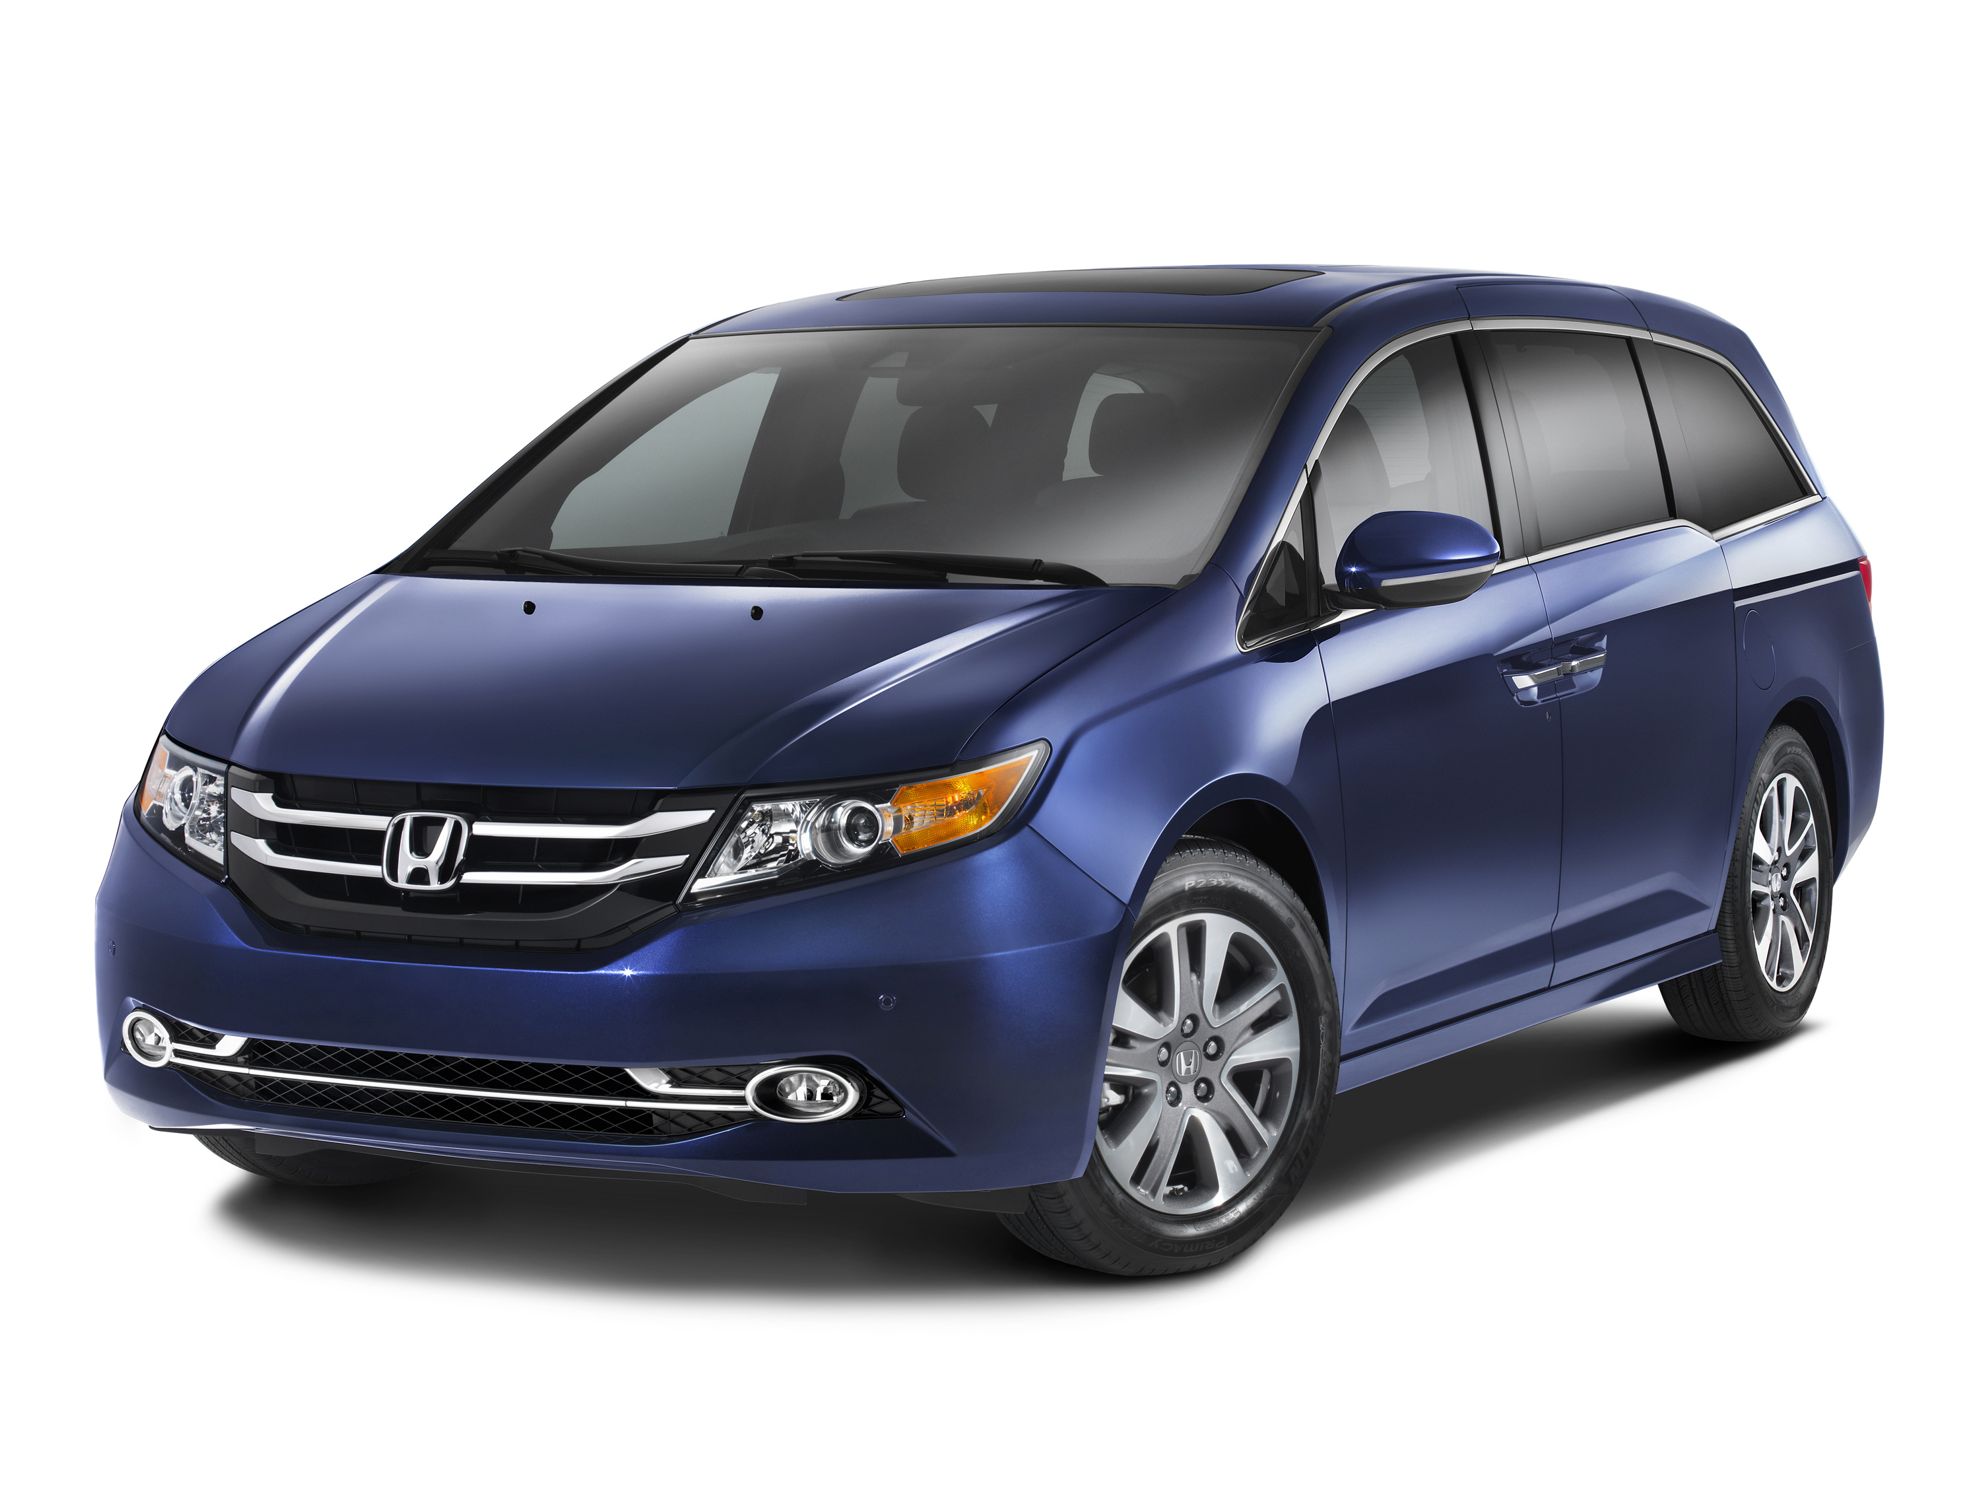 Honda Odyssey 14 Year History Top Safety Scores from NHTSA